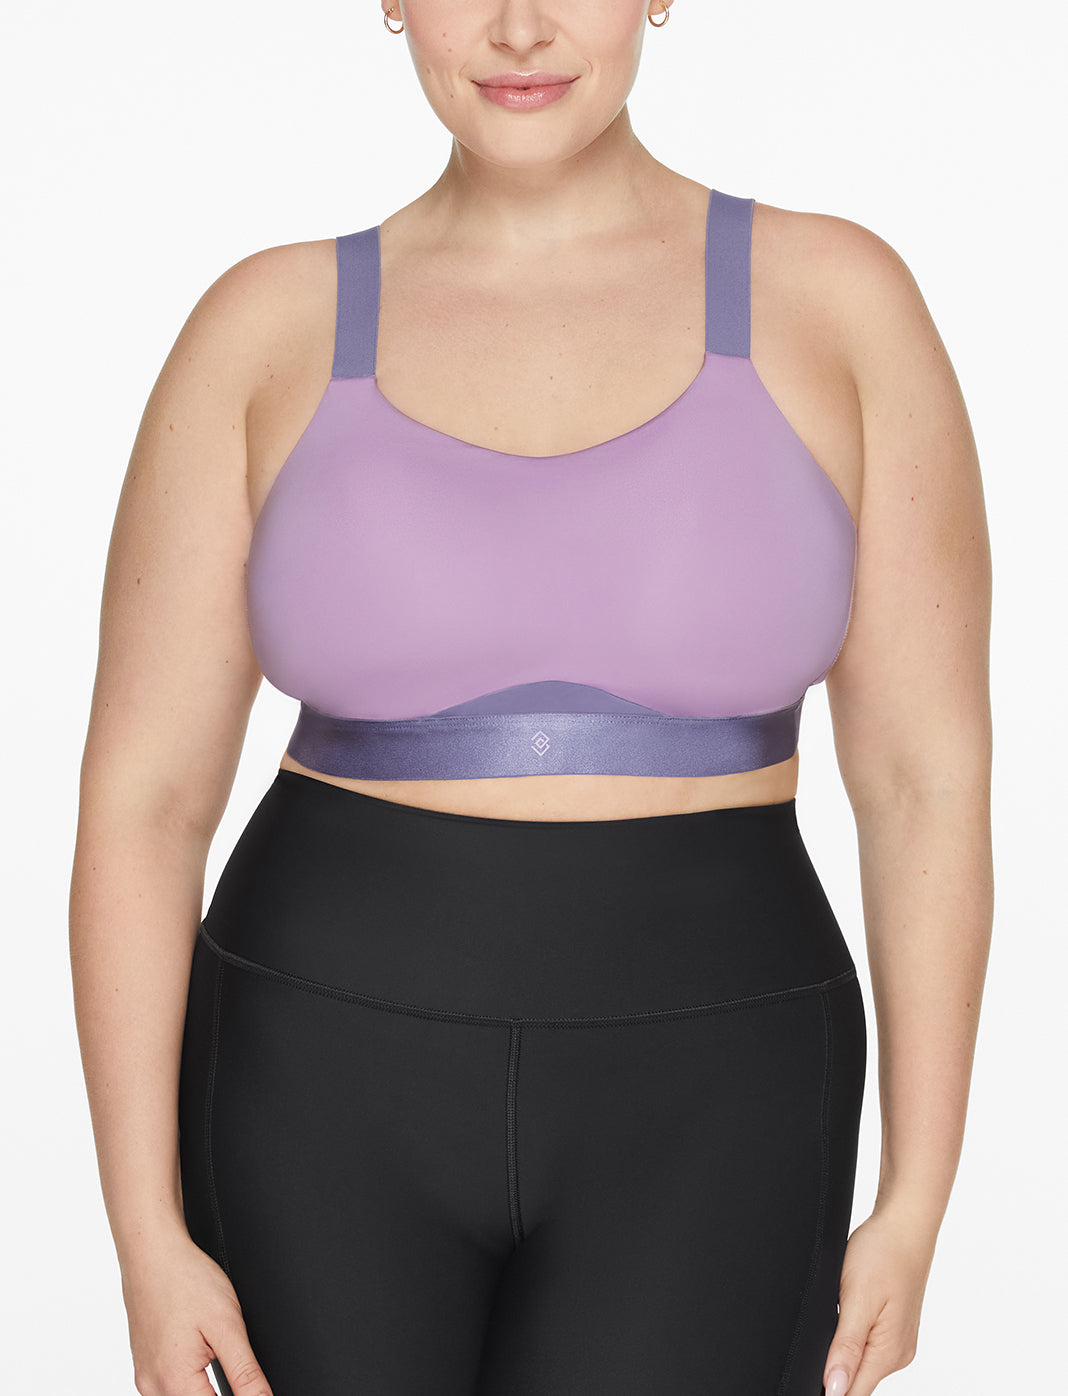 Sports Bras 36H, Bras for Large Breasts